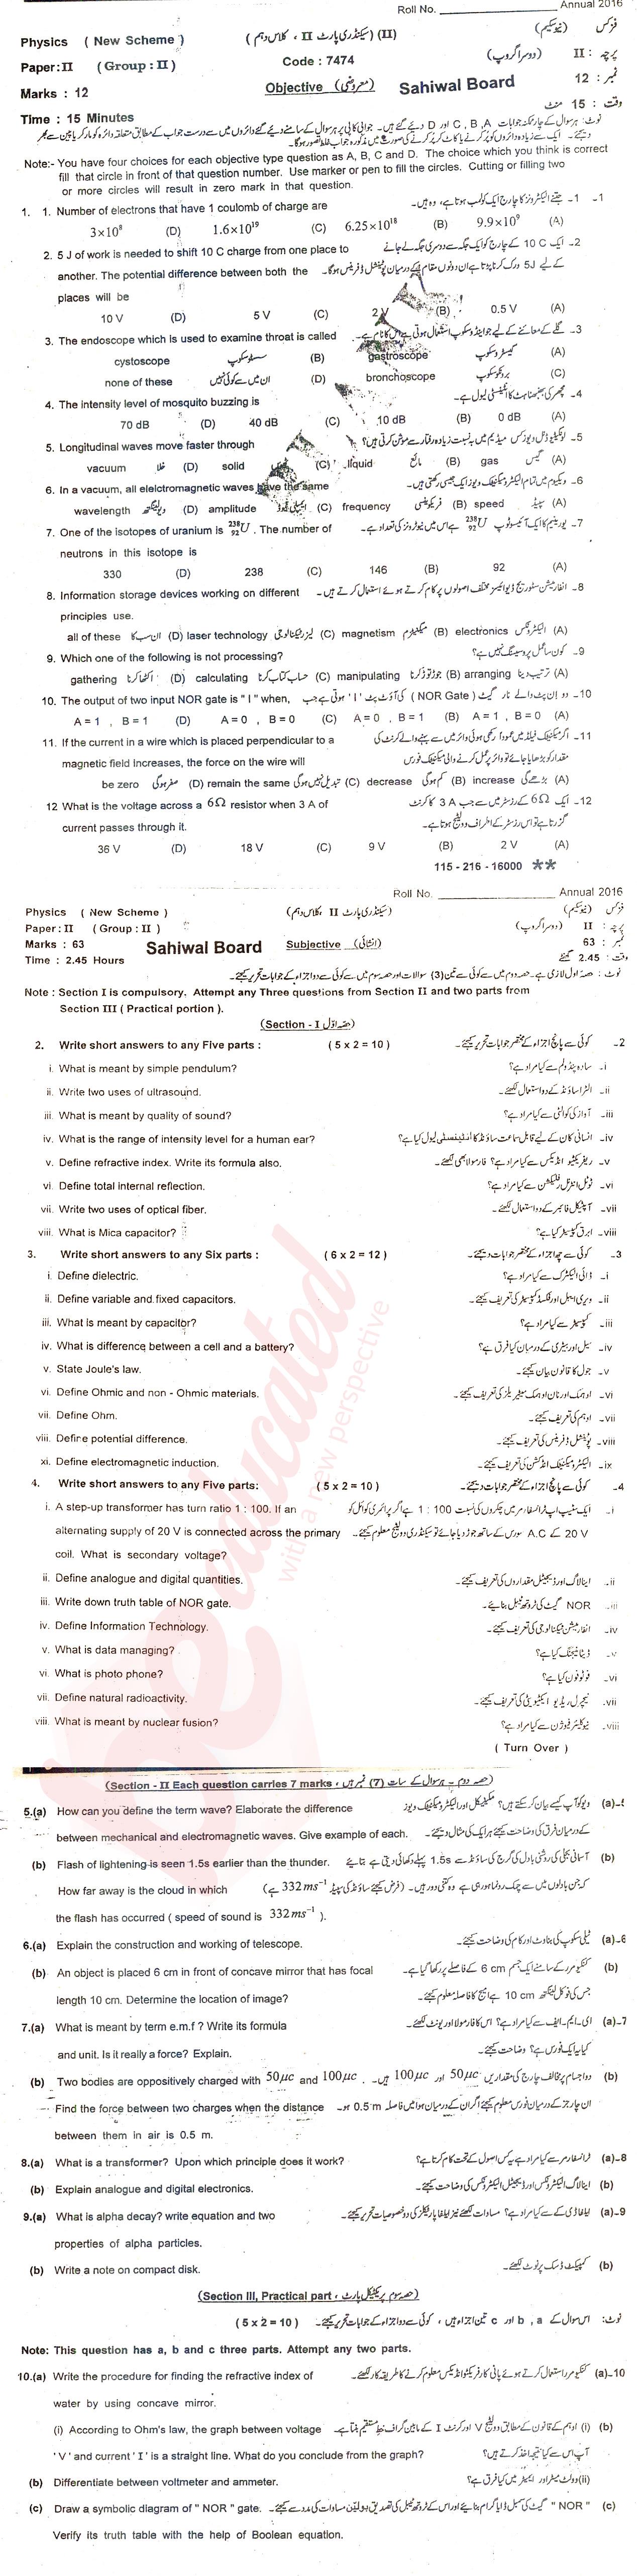 Physics 10th class Past Paper Group 2 BISE Sahiwal 2016